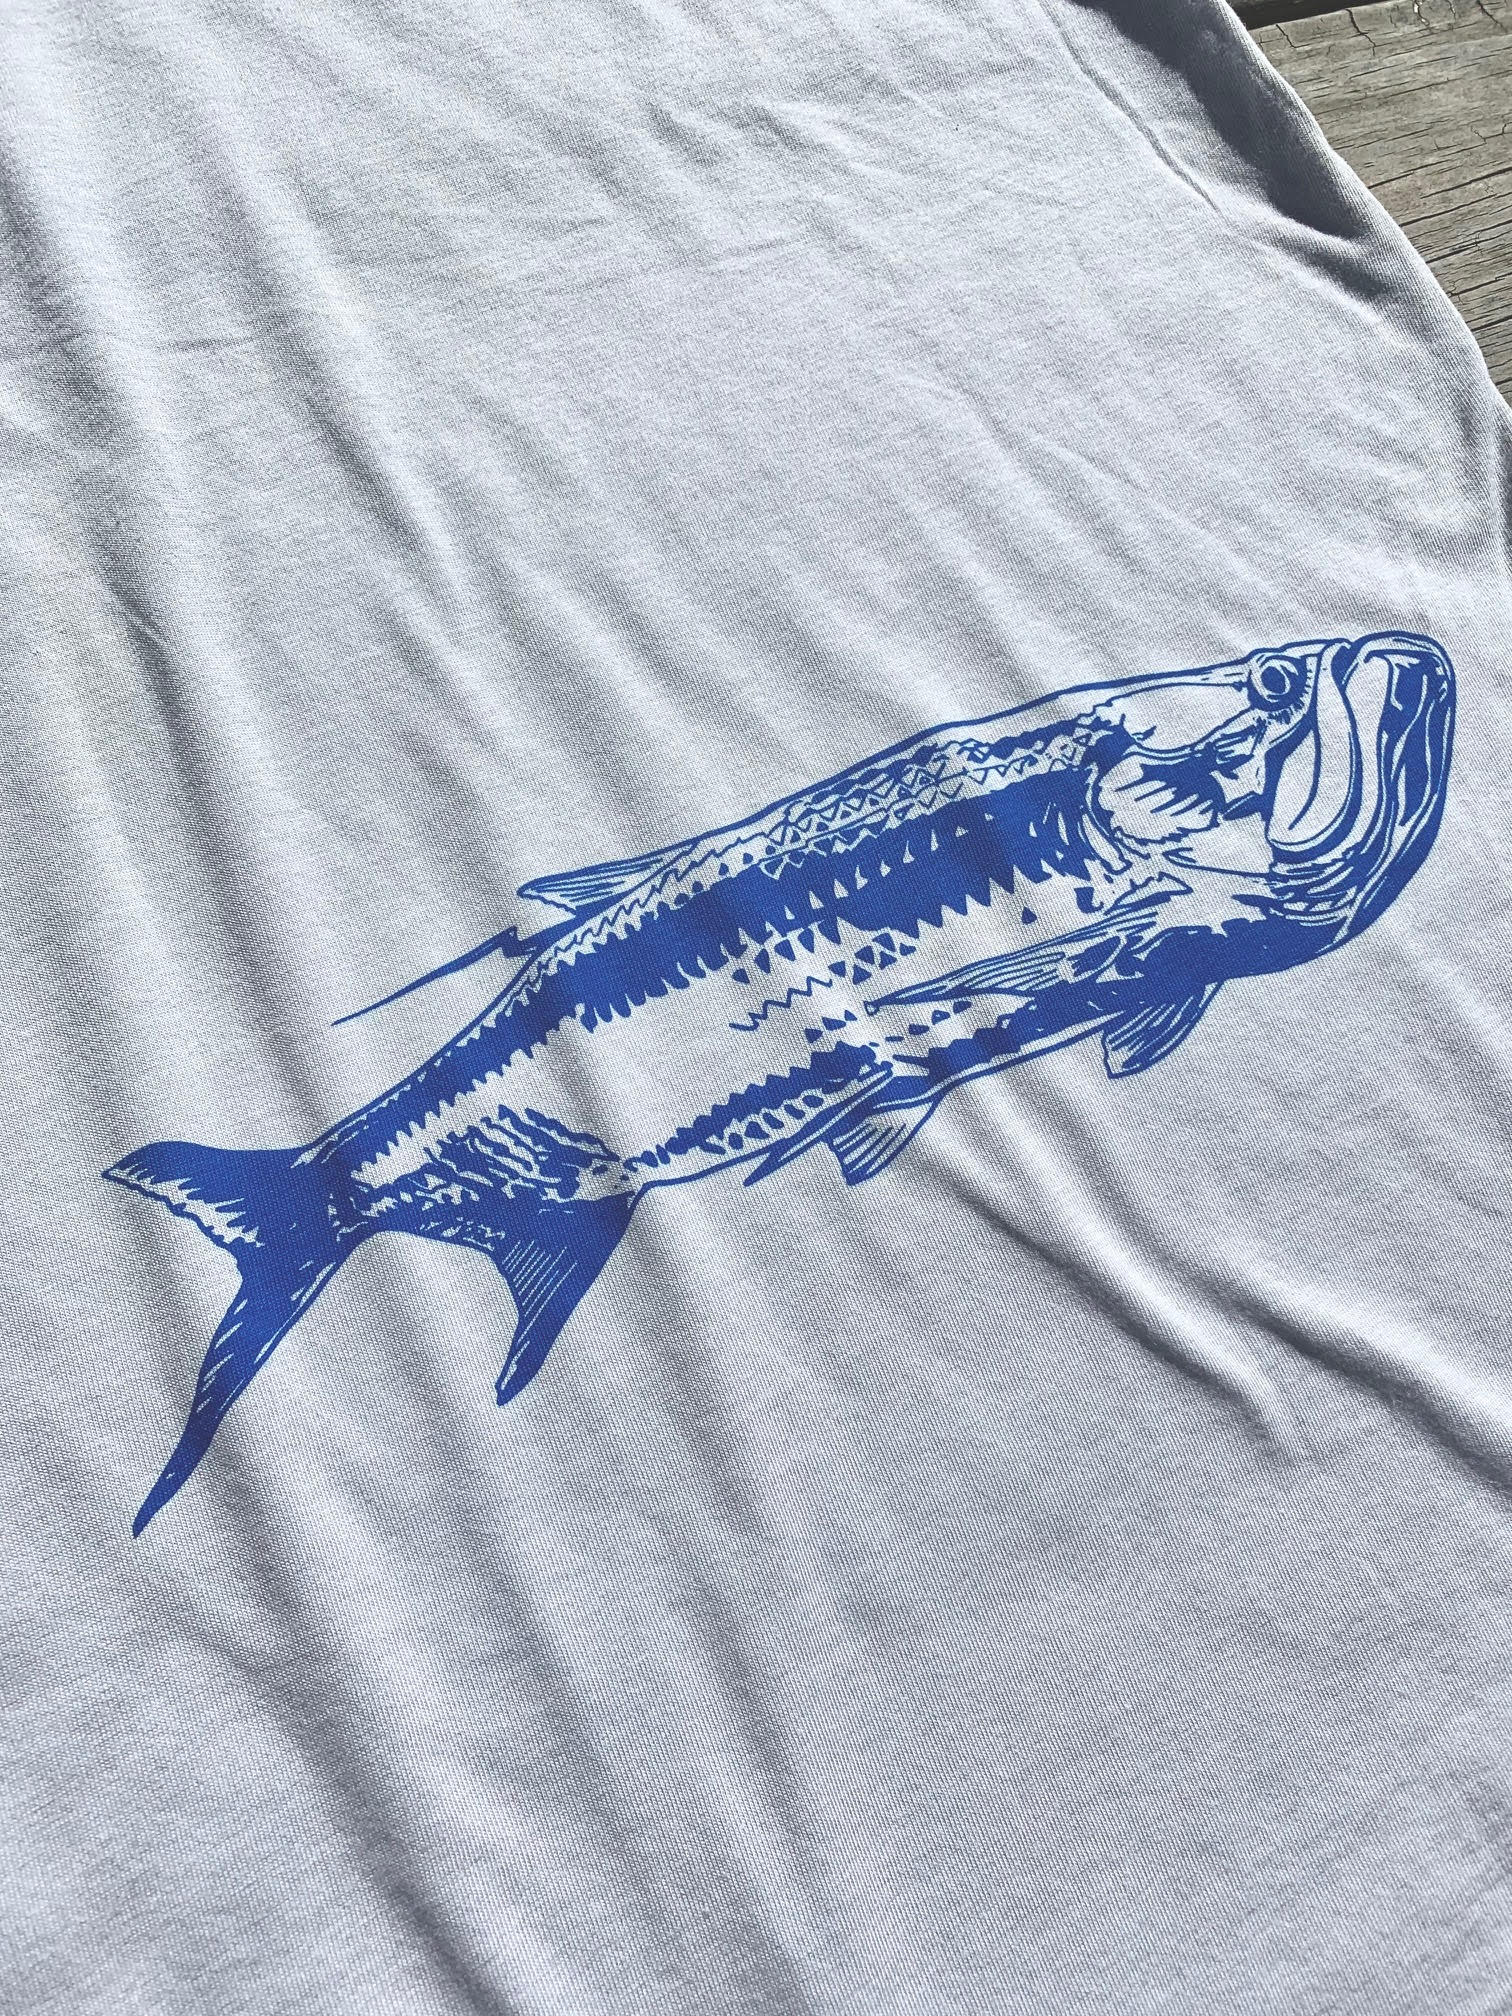 Fly Tarpon Tee, SEEK Outdoors close up of back view